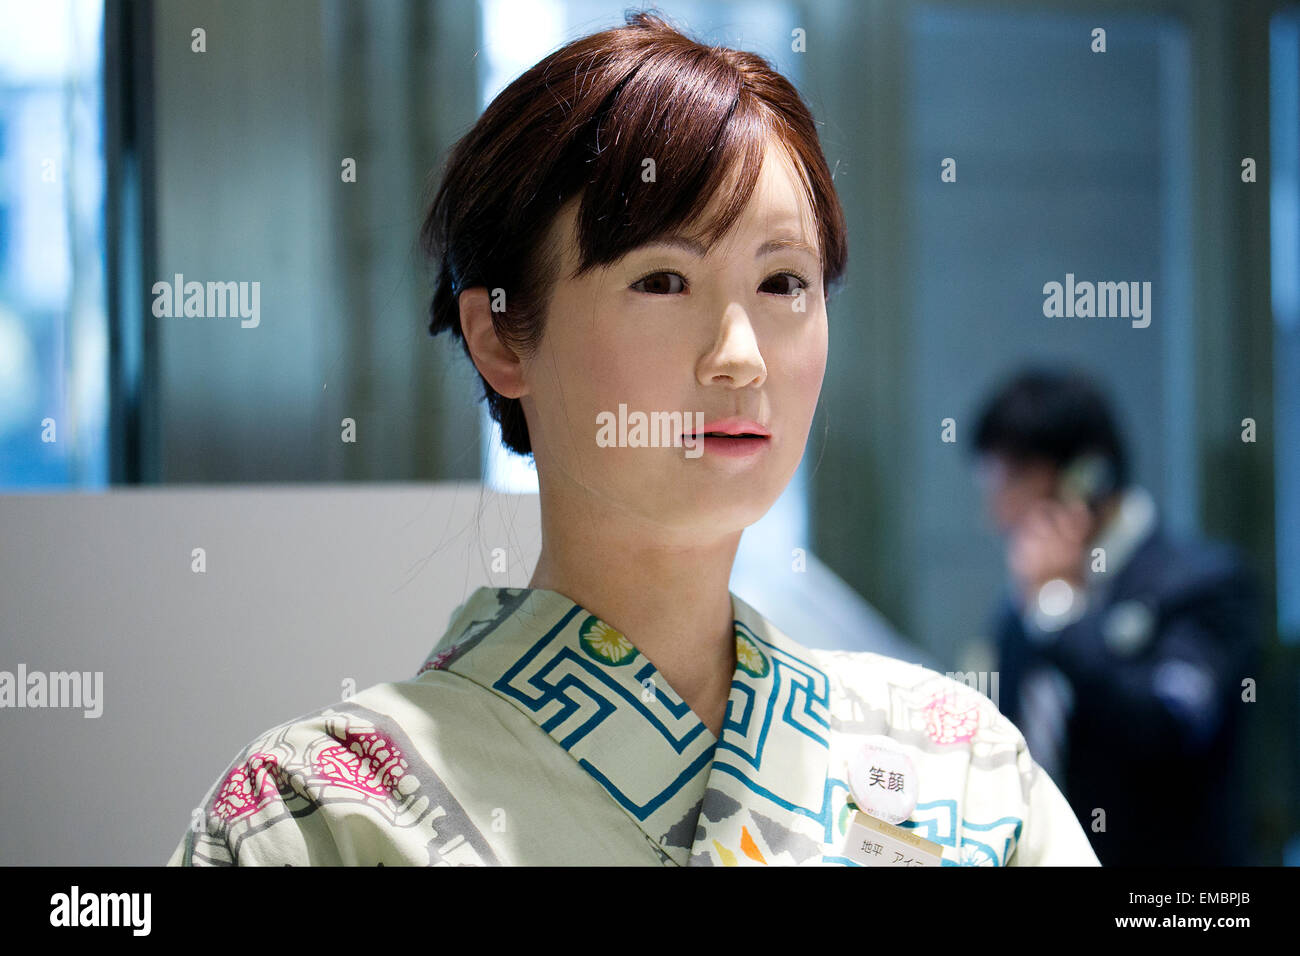 Tokyo, Japan. 20th April, 2015. Robot Aiko Chihira debuts as a receptionist  at the Nihonbashi Mitsukoshi department store on April 20, 2015, Tokyo,  Japan. The robot is being employed for two days